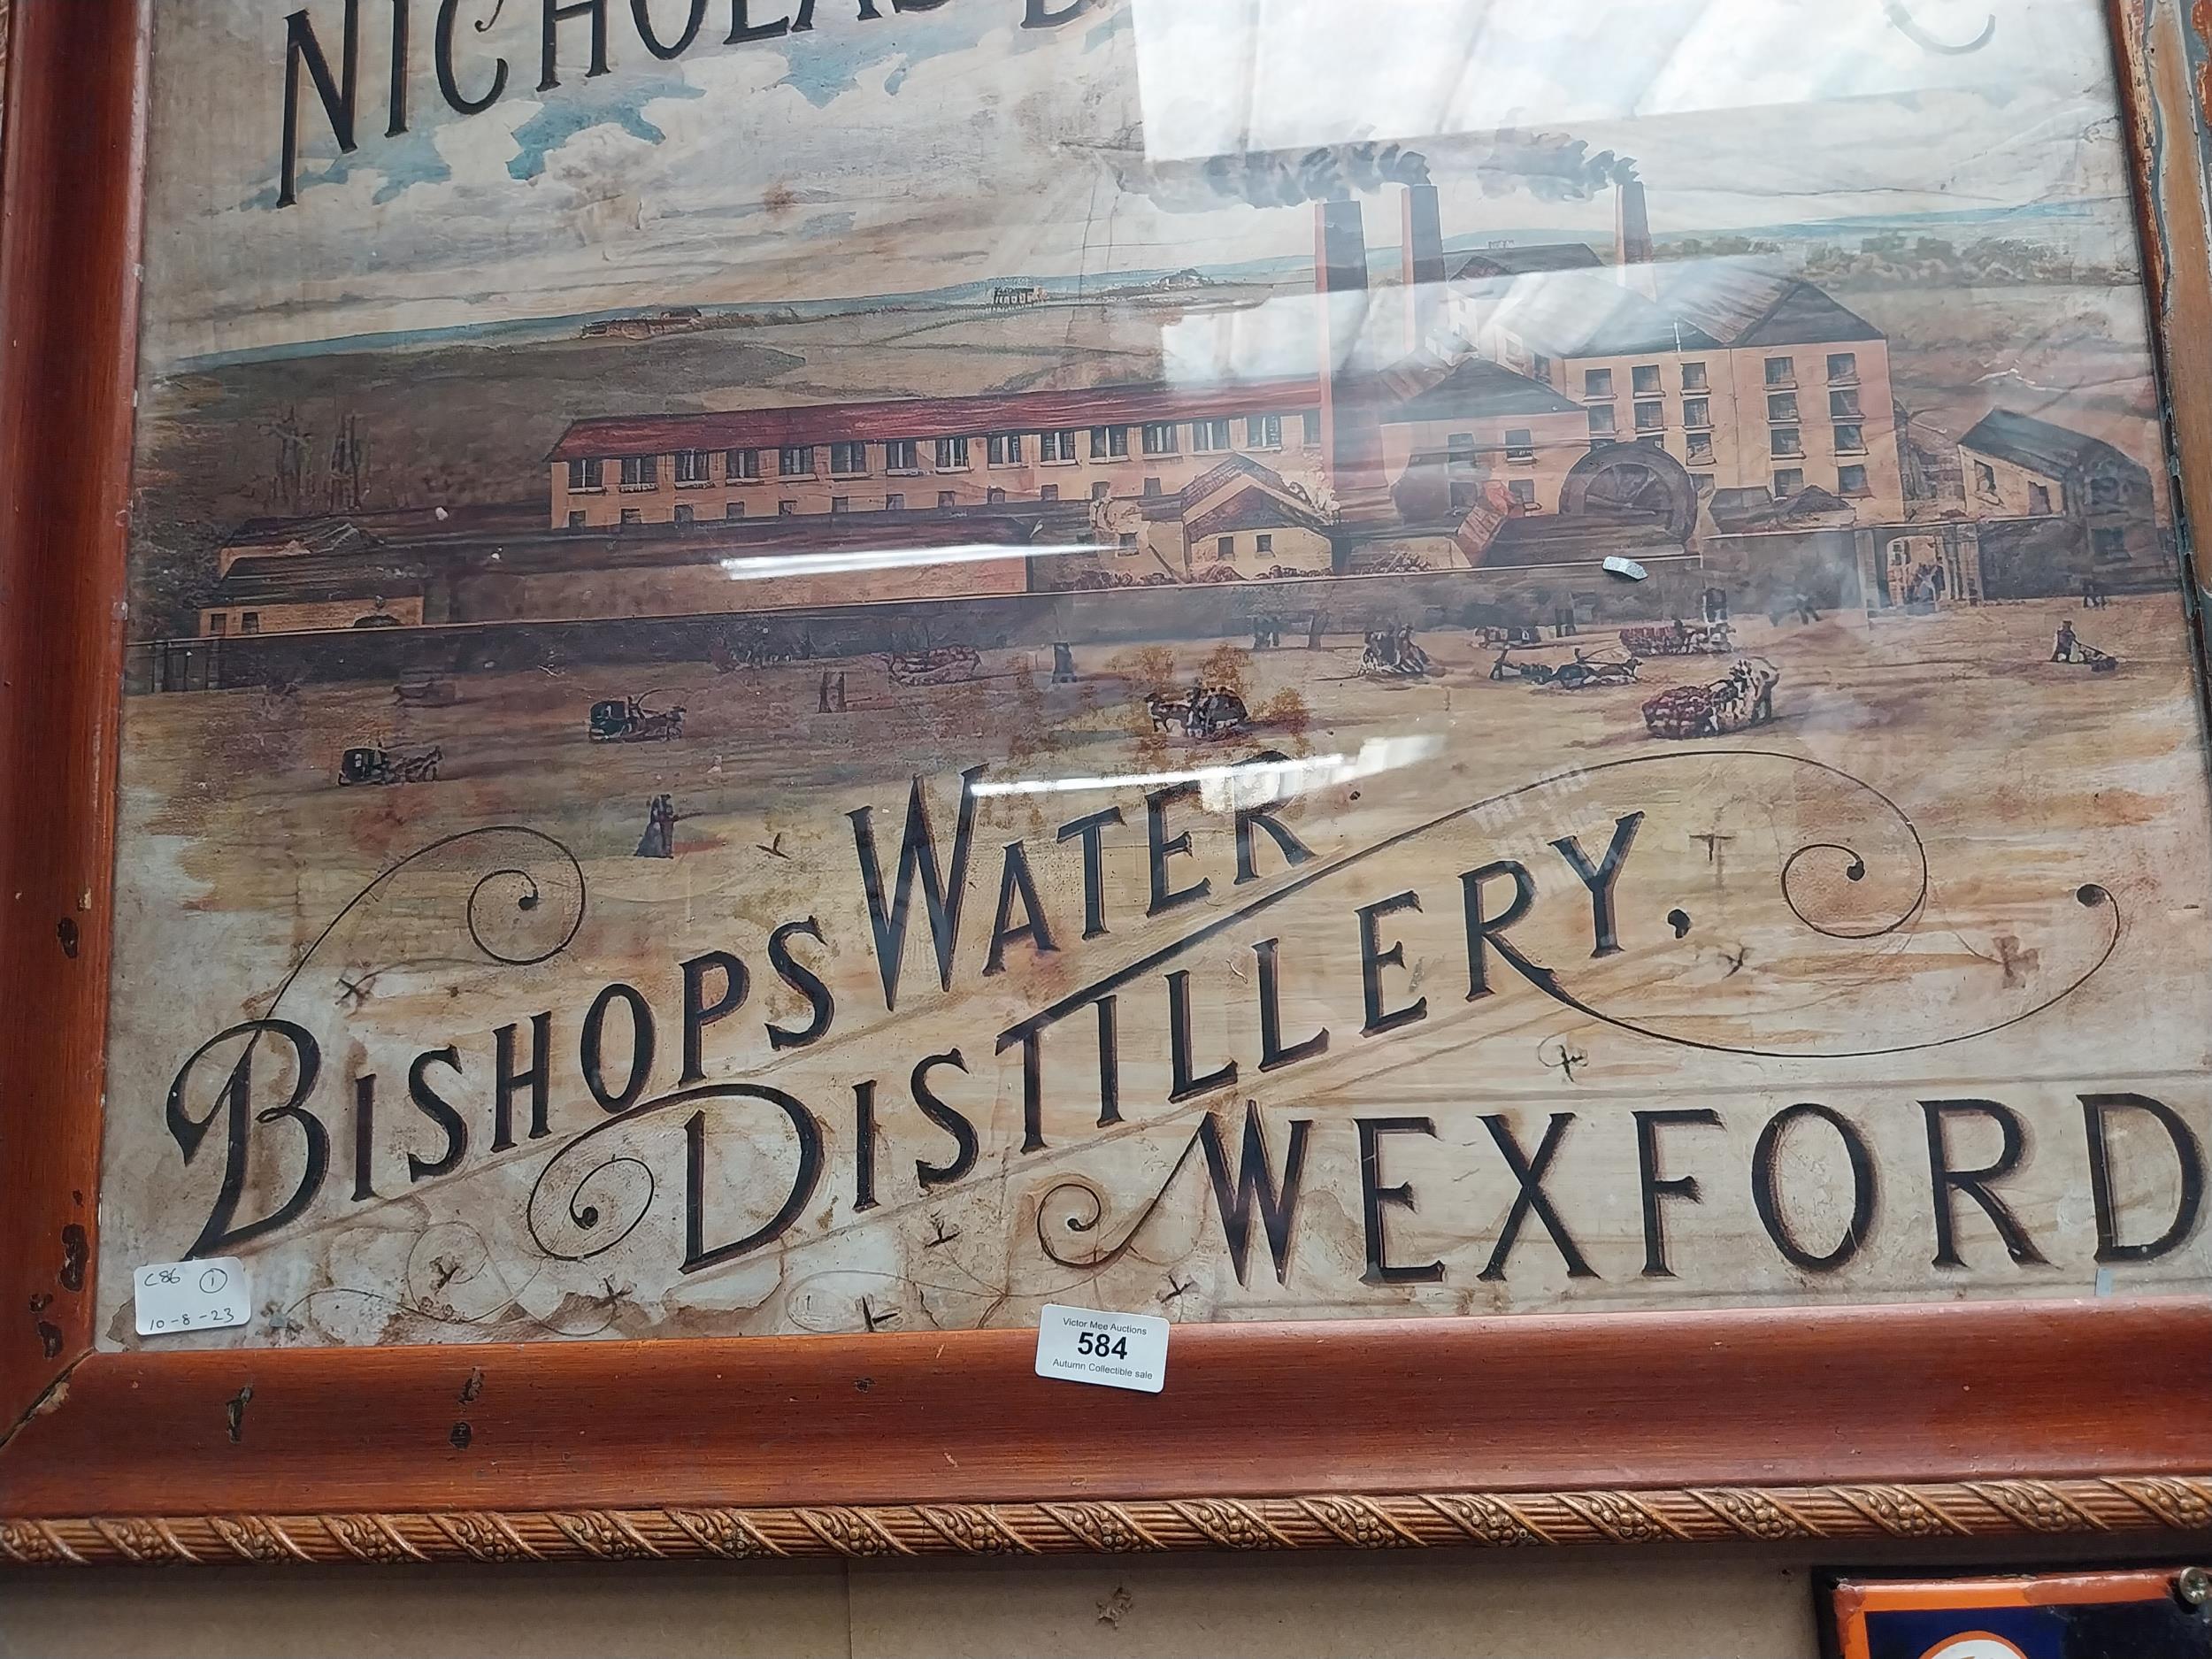 Nicholas Deveraux and Co Bishops water Distillery Wexford framed advertising print. {64 cm H x 76 cm - Image 2 of 3